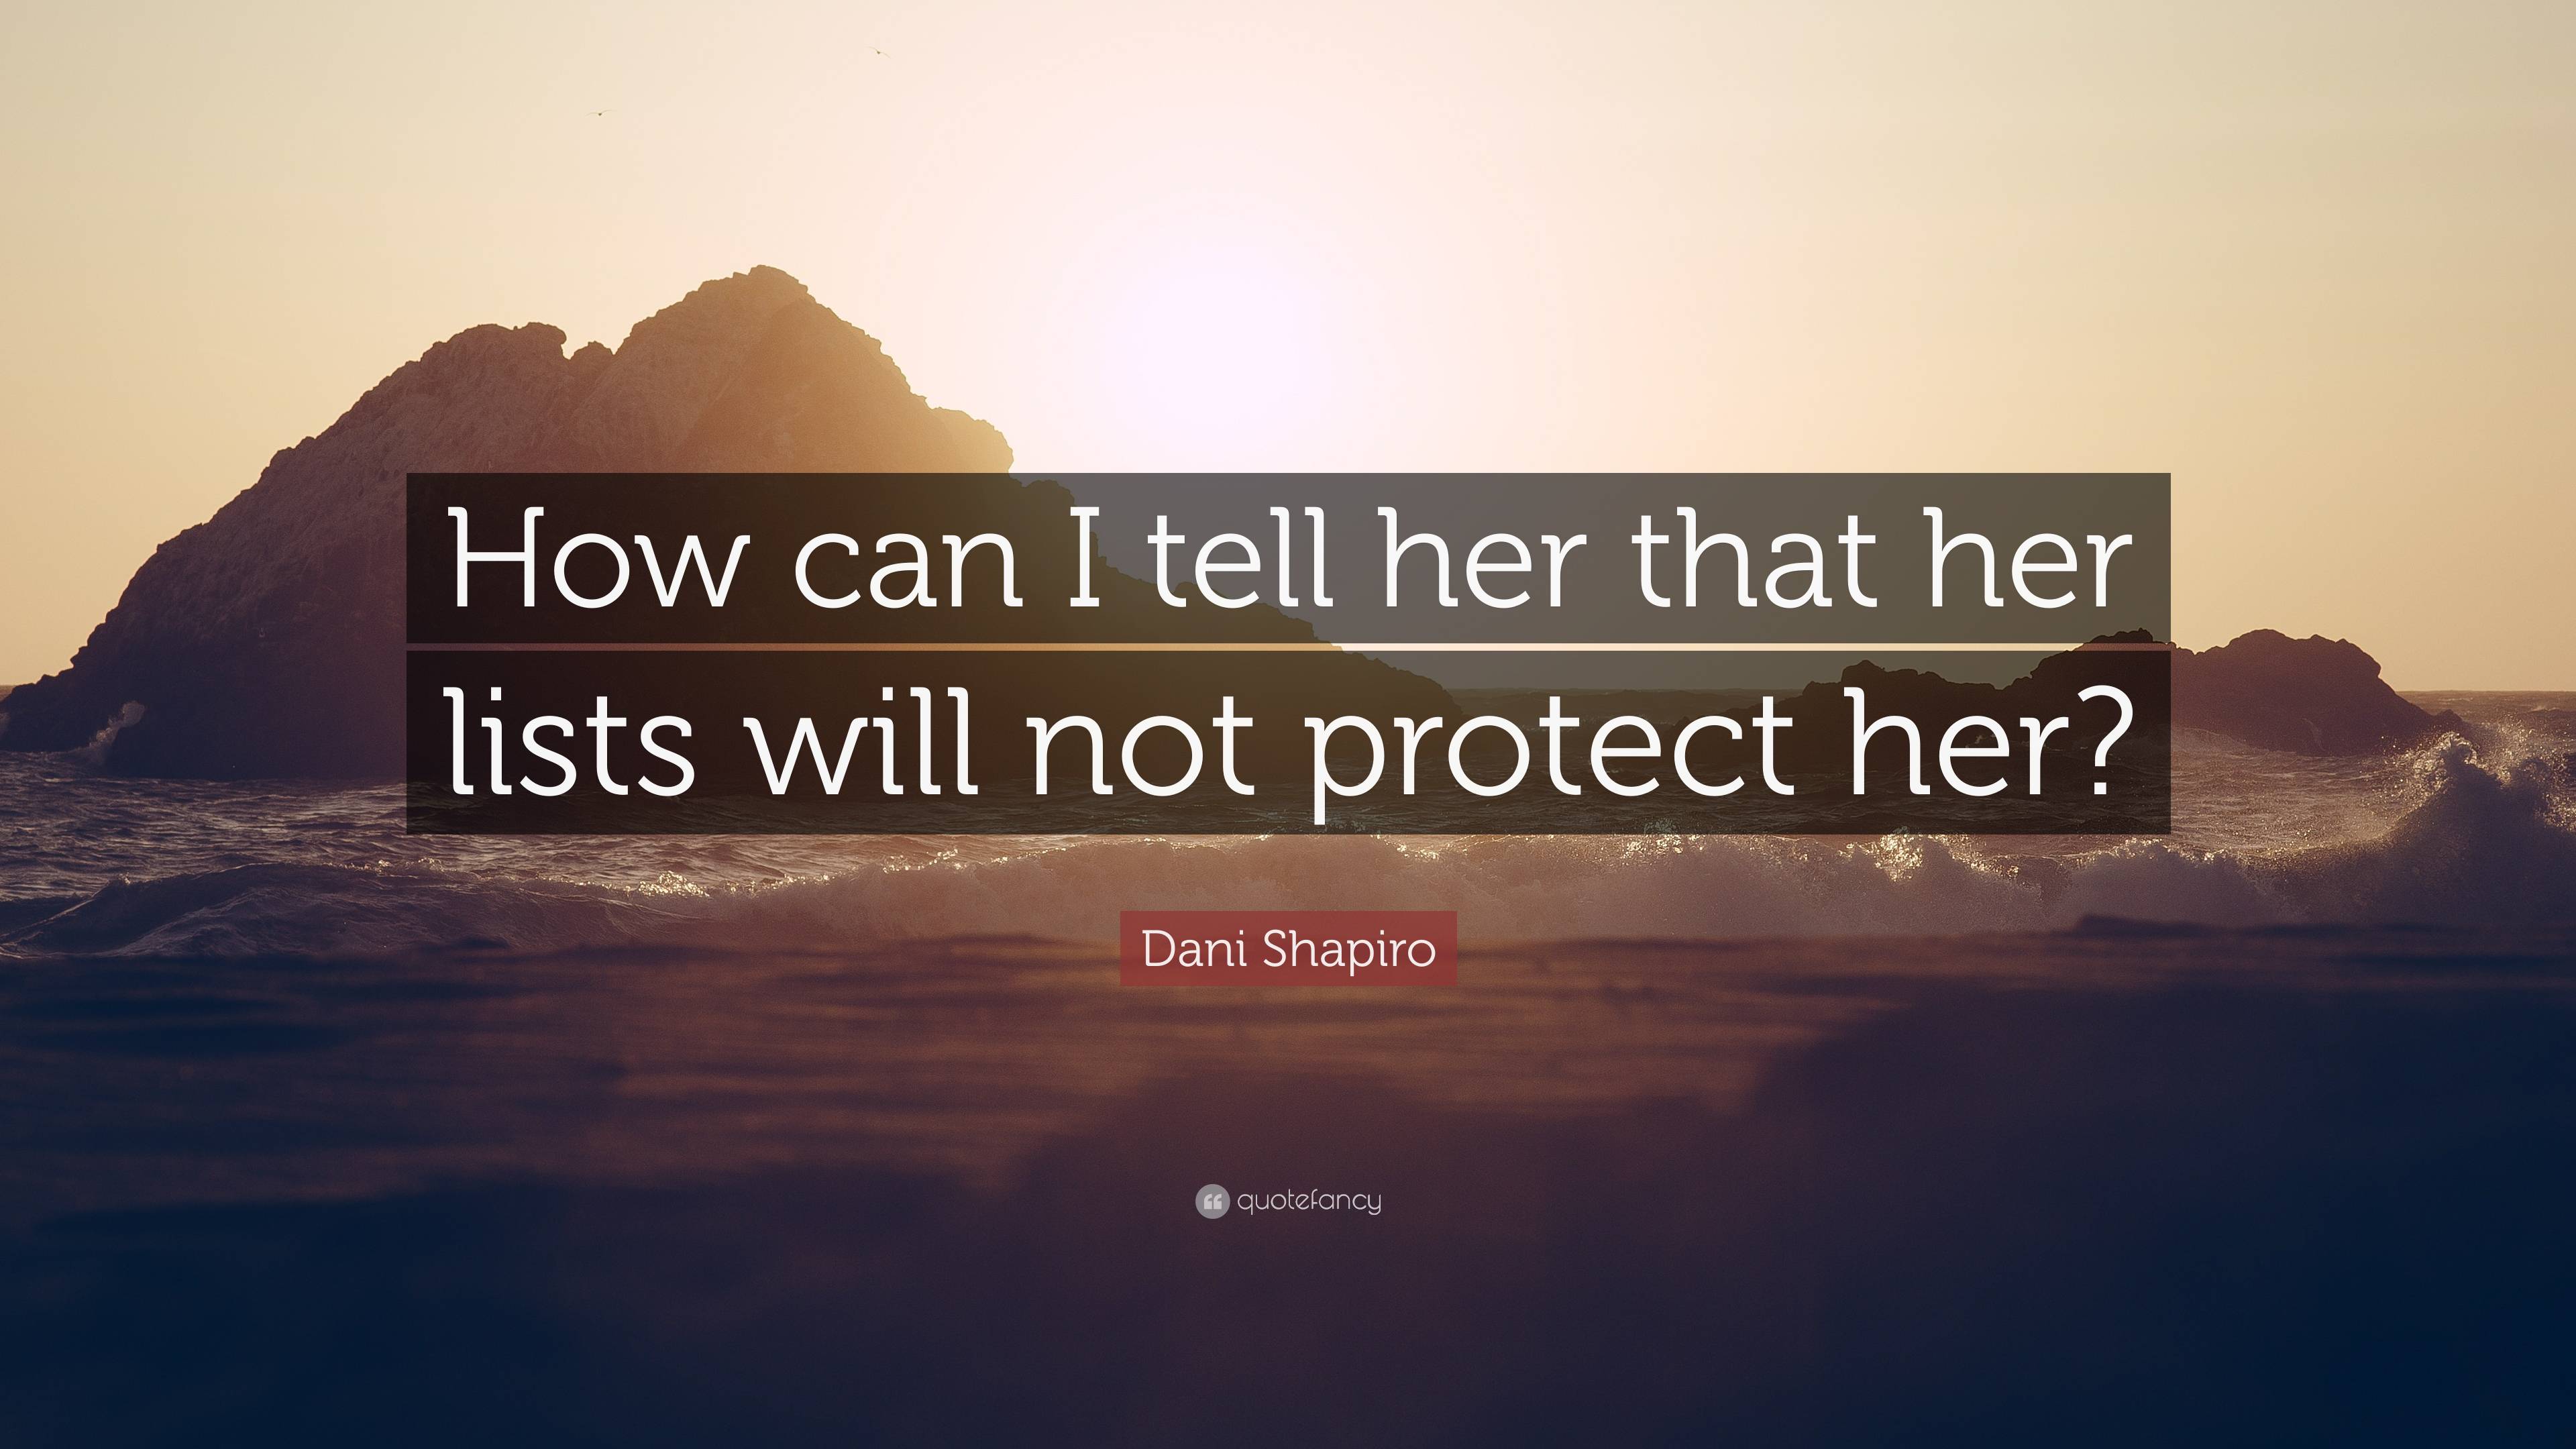 Dani Shapiro Quote: “How can I tell her that her lists will not protect ...